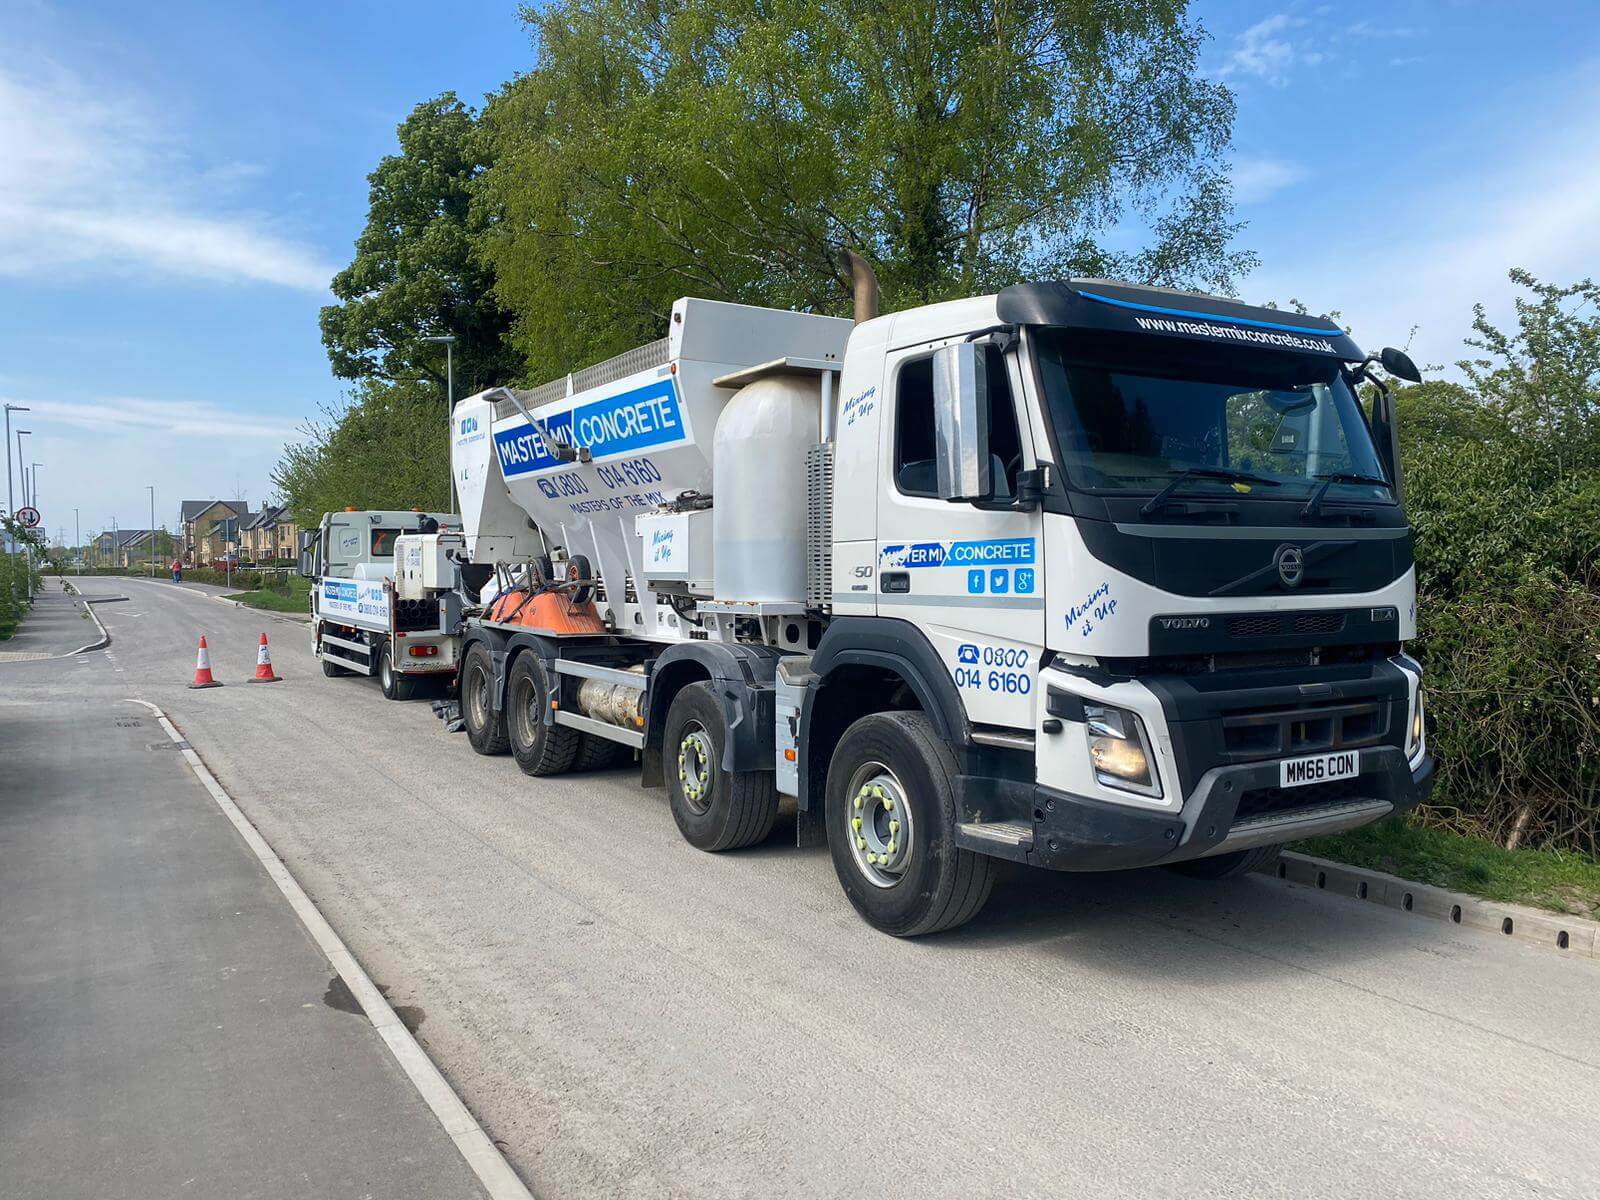 Master Mix Concrete Delivery to a site in Dunstable